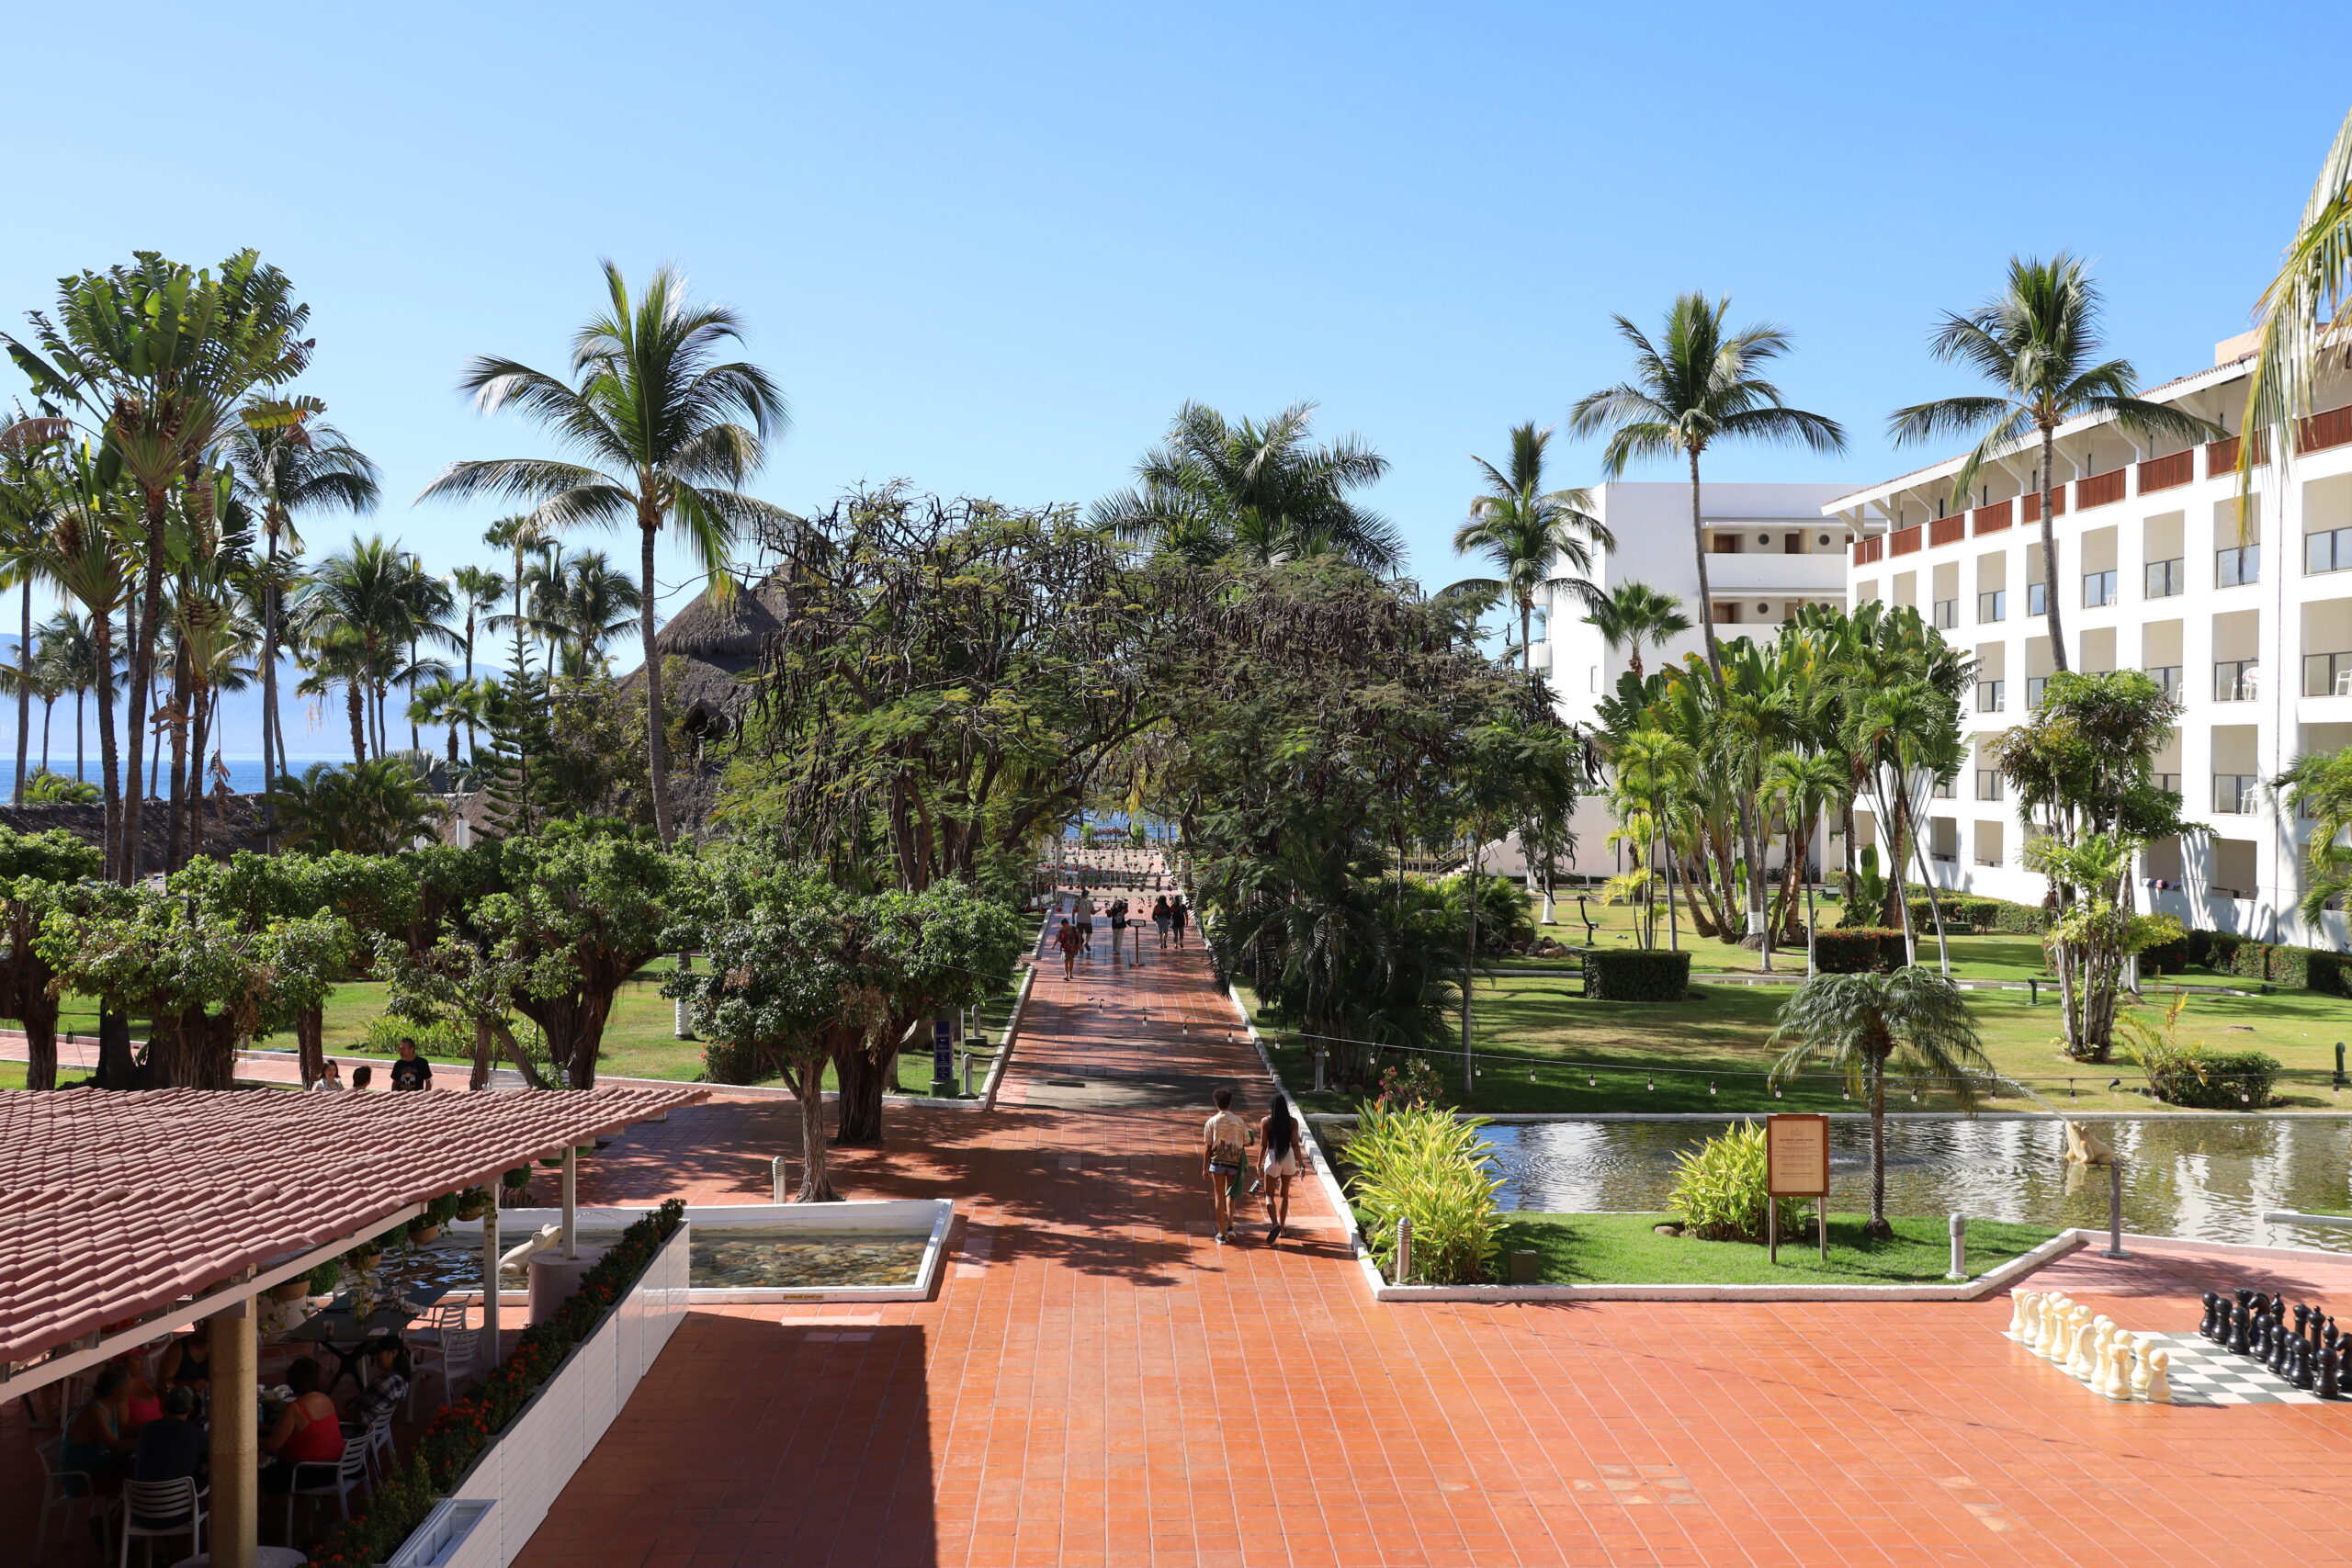 Melia Puerto Vallarta: The Ultimate Guide To Planning Your Trip